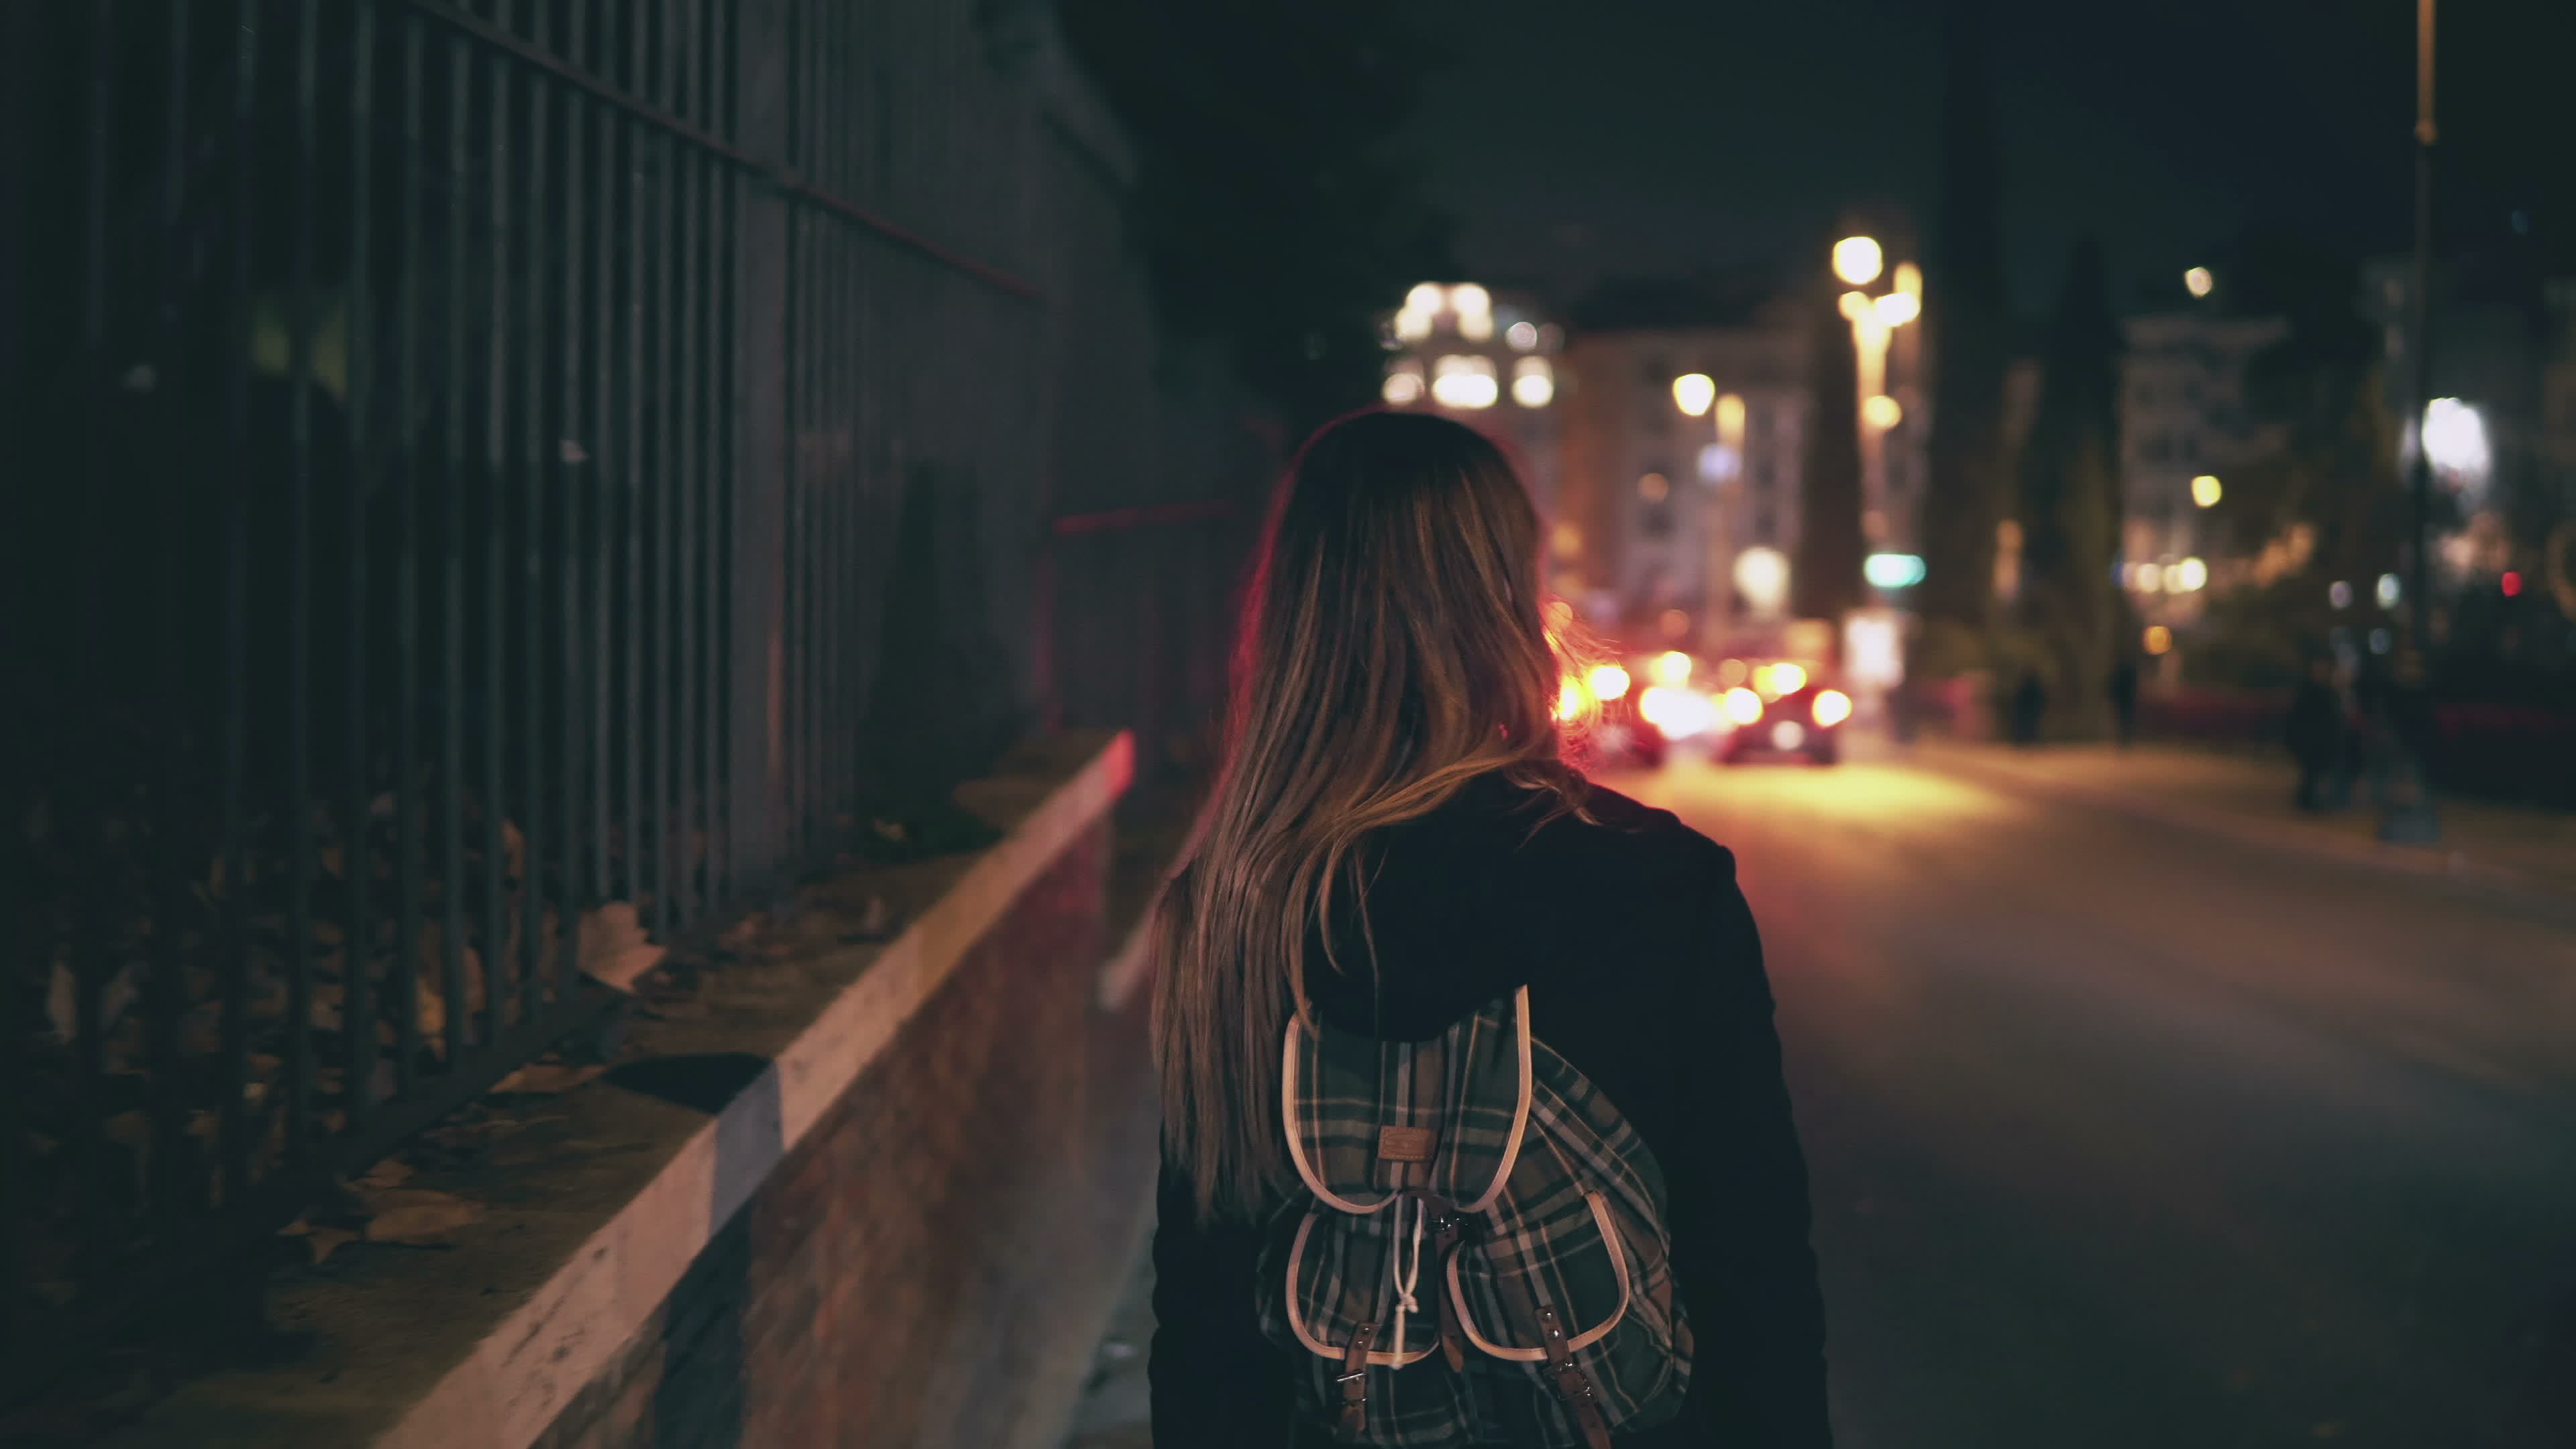 Girl with bag is walking through the night city | Source: Shutterstock.com